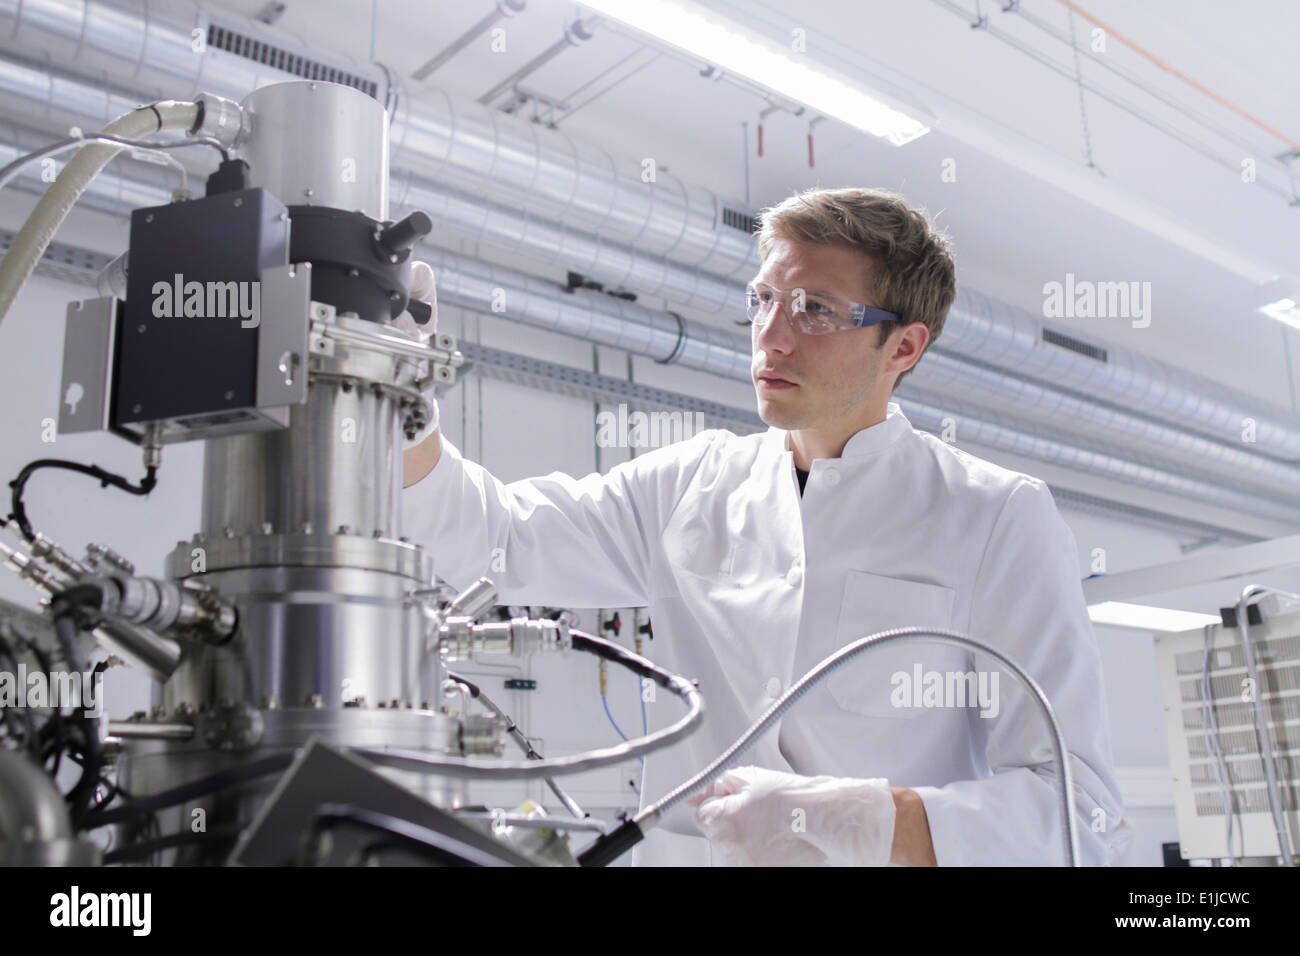 Scientist standing in analytical laboratory with scanning electron microscope and spectrometer Stock Photo